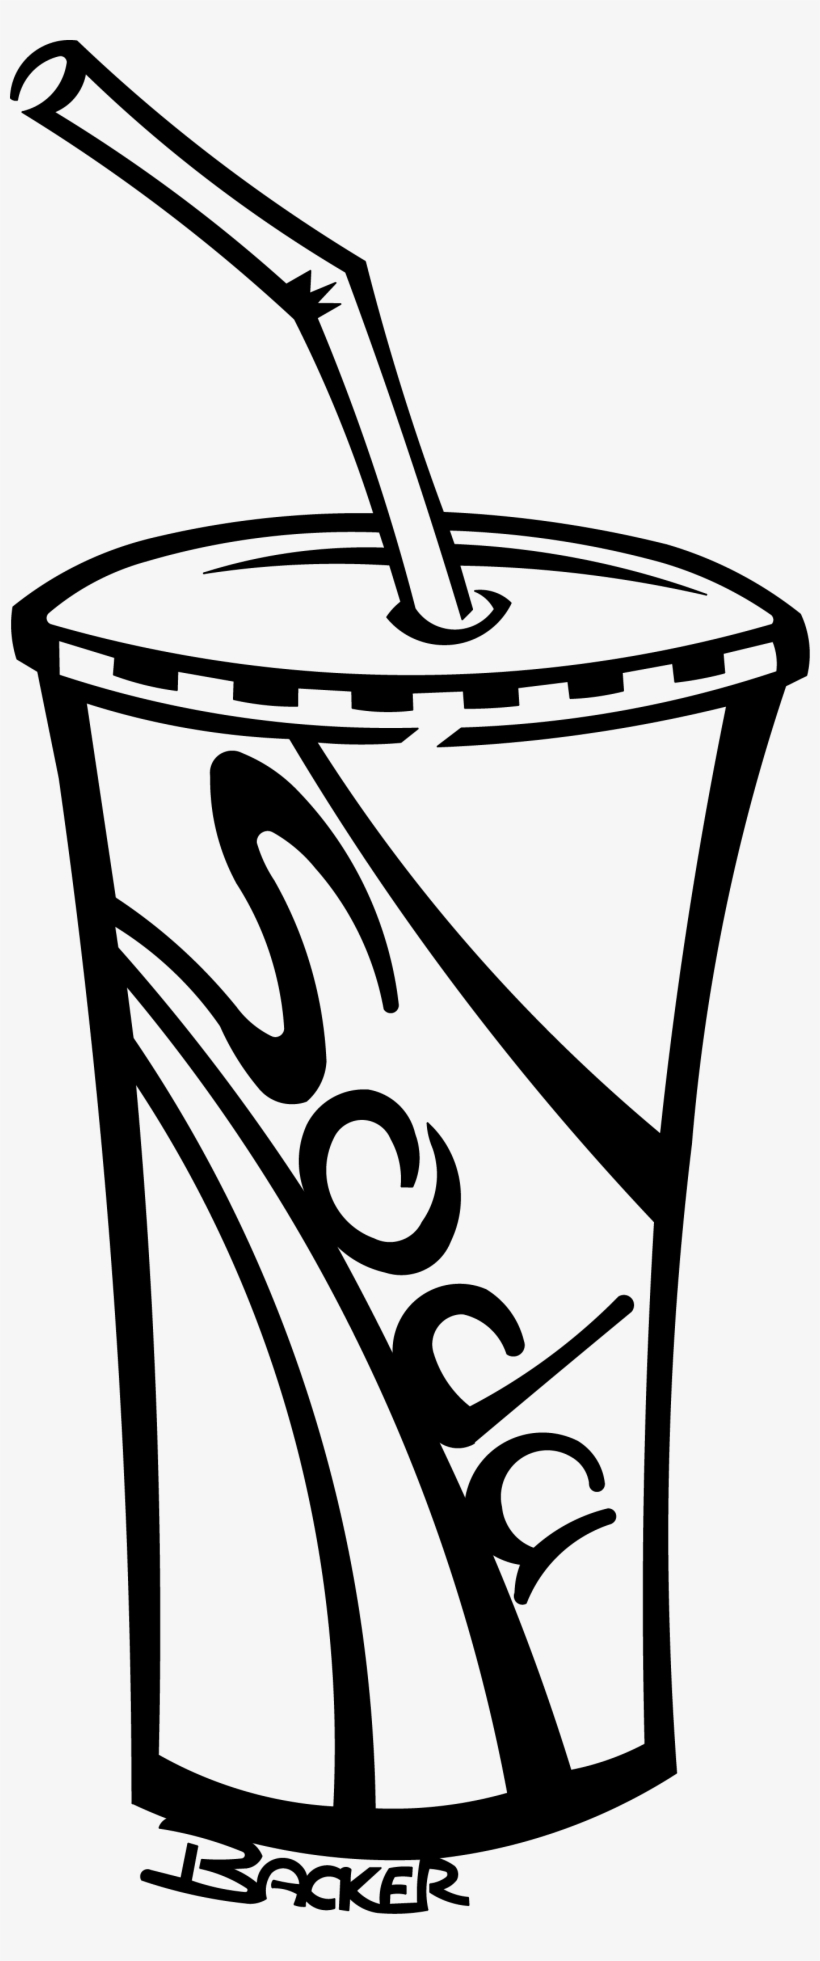 Soda Cup - Soft Drinks Clipart Black And White, transparent png #1482058